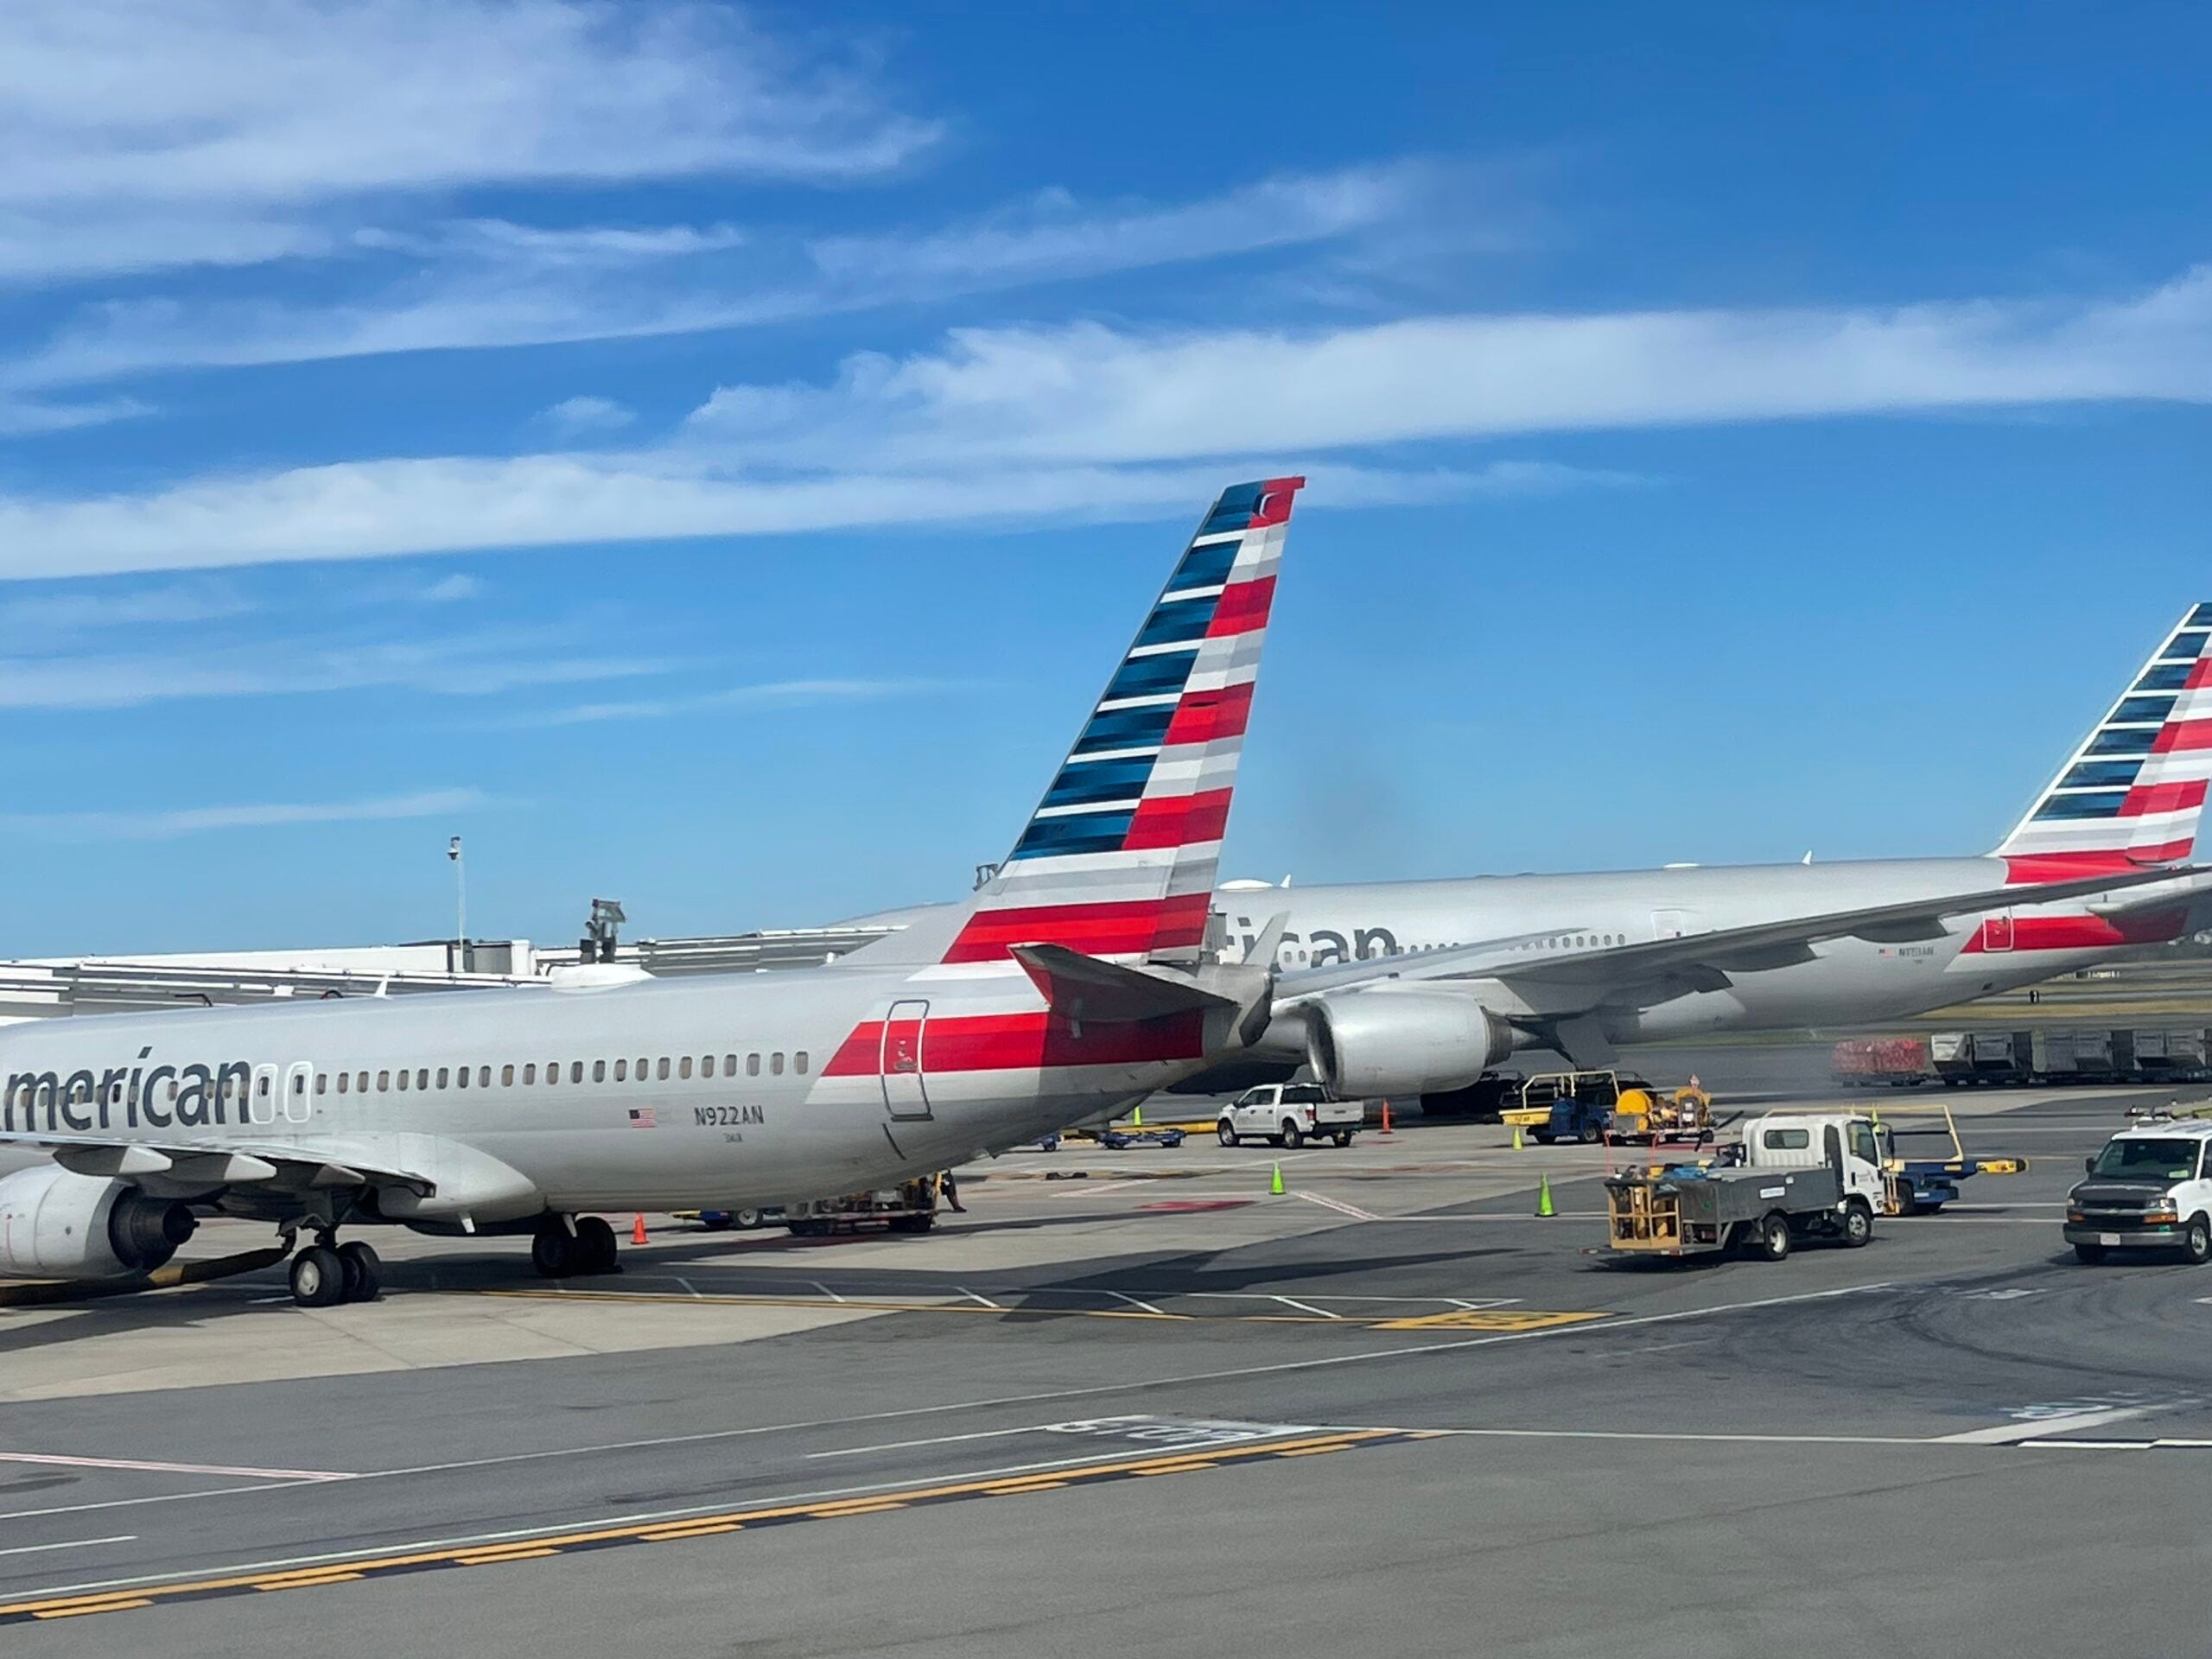 American Airlines planes at gate in Boston